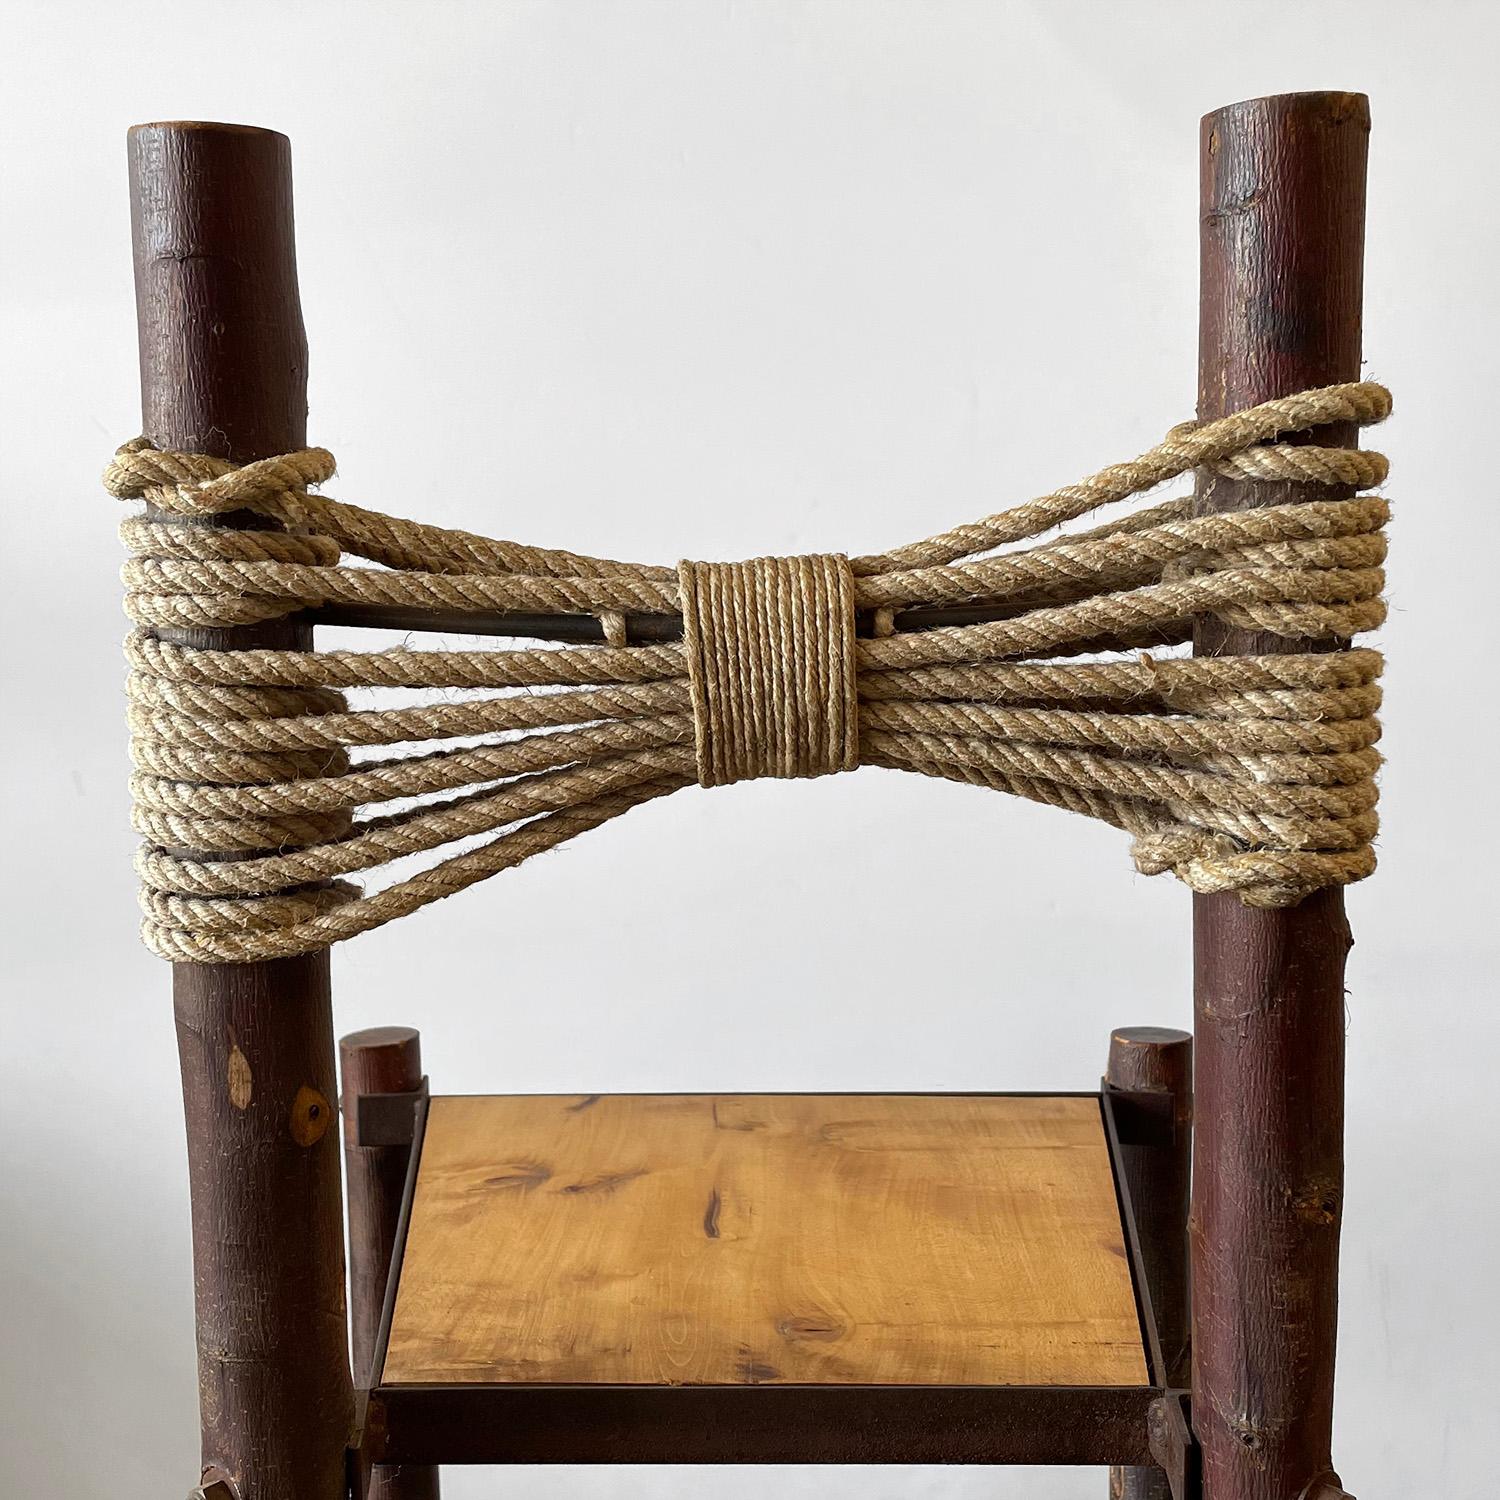 French primitive chair
France, early 20th century
Artisan crafted, rustic look and feel
Chair frame is made of raw wood
Bowtie back support is comprised of braided rope
Patina from age and use
Last two are for size reference only
Listing is